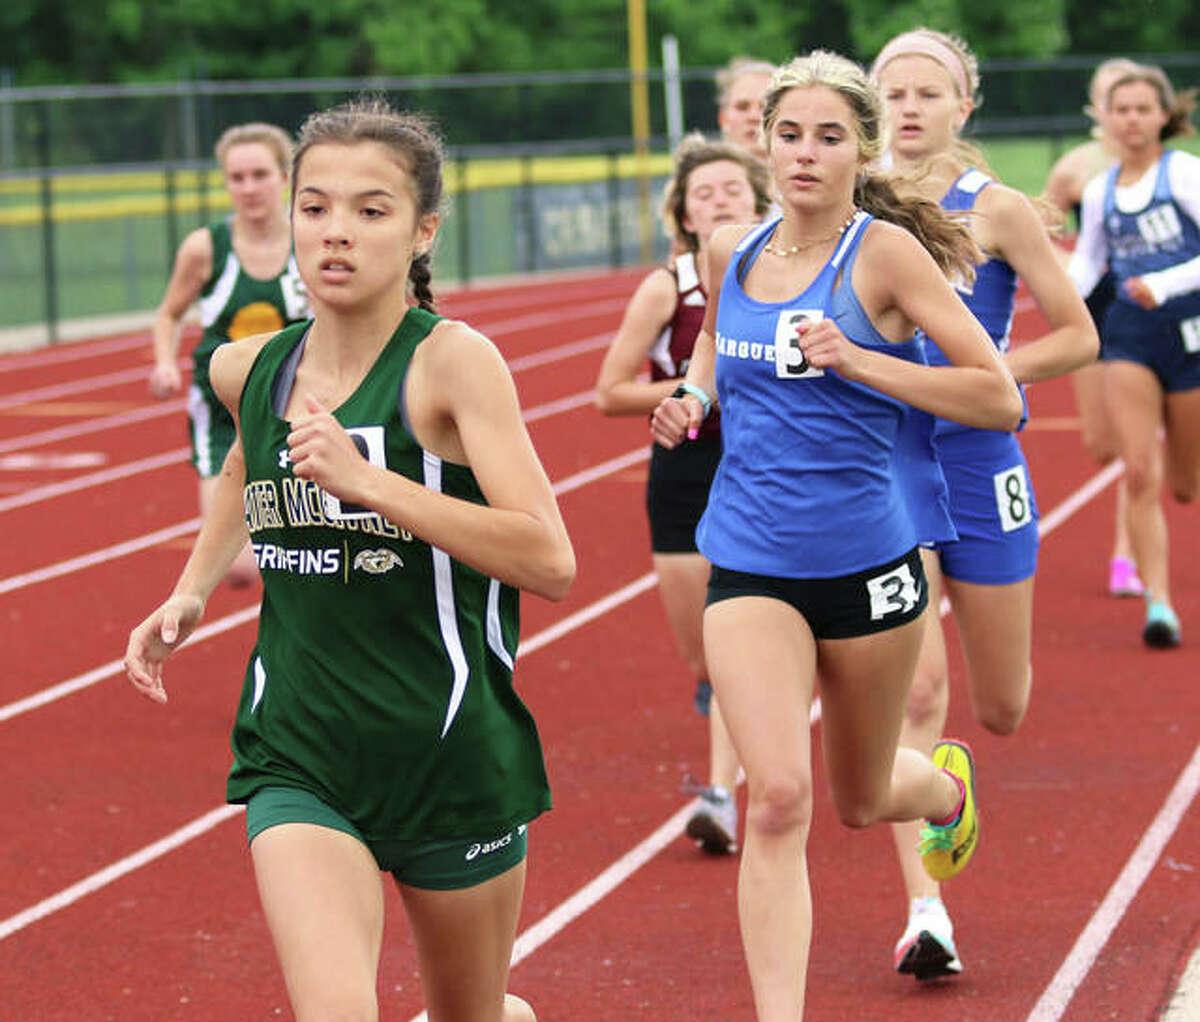 Father McGivney freshman Kaitlyn Hatley (front) leads runners in the 800 meters during the Althoff Class 1A Sectional June 2 in Belleville. On Thursday, Hatley became McGivney’s track first state medalist with a seventh-place finish in both the 800 and 1,600 in the state meet at Charleston.